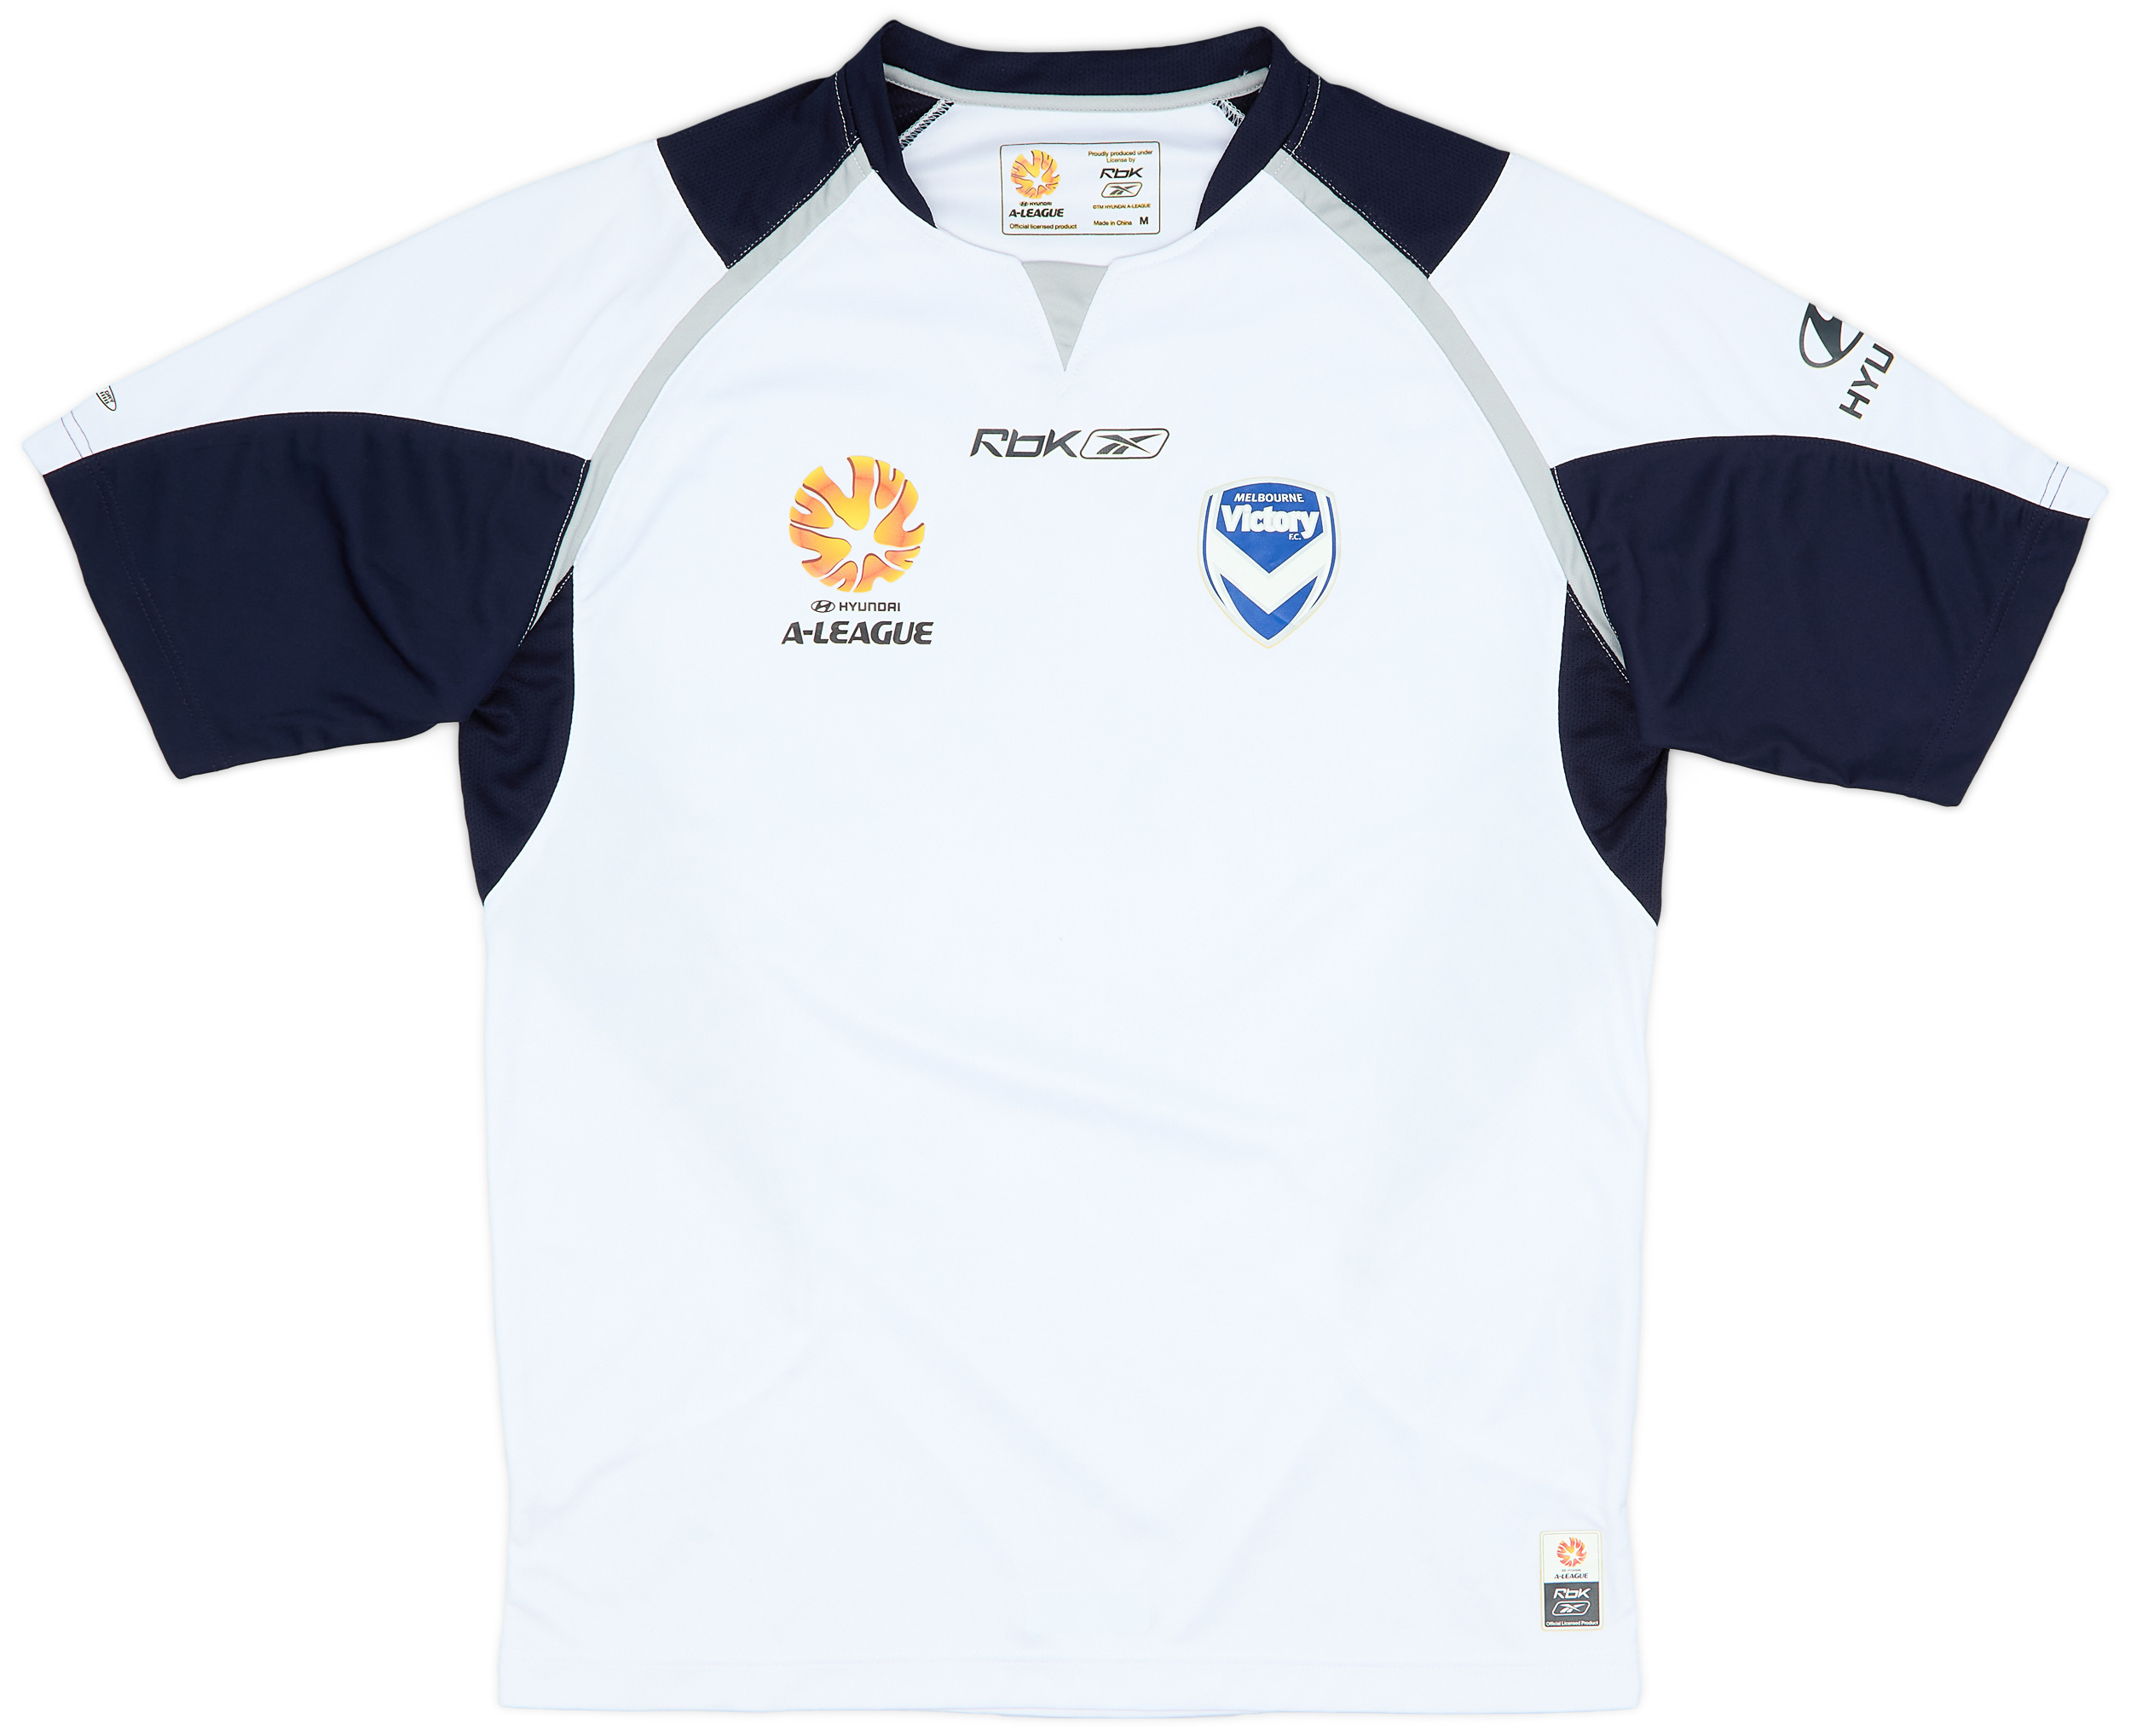 2005-06 Melbourne Victory Away Shirt - 9/10 - ()